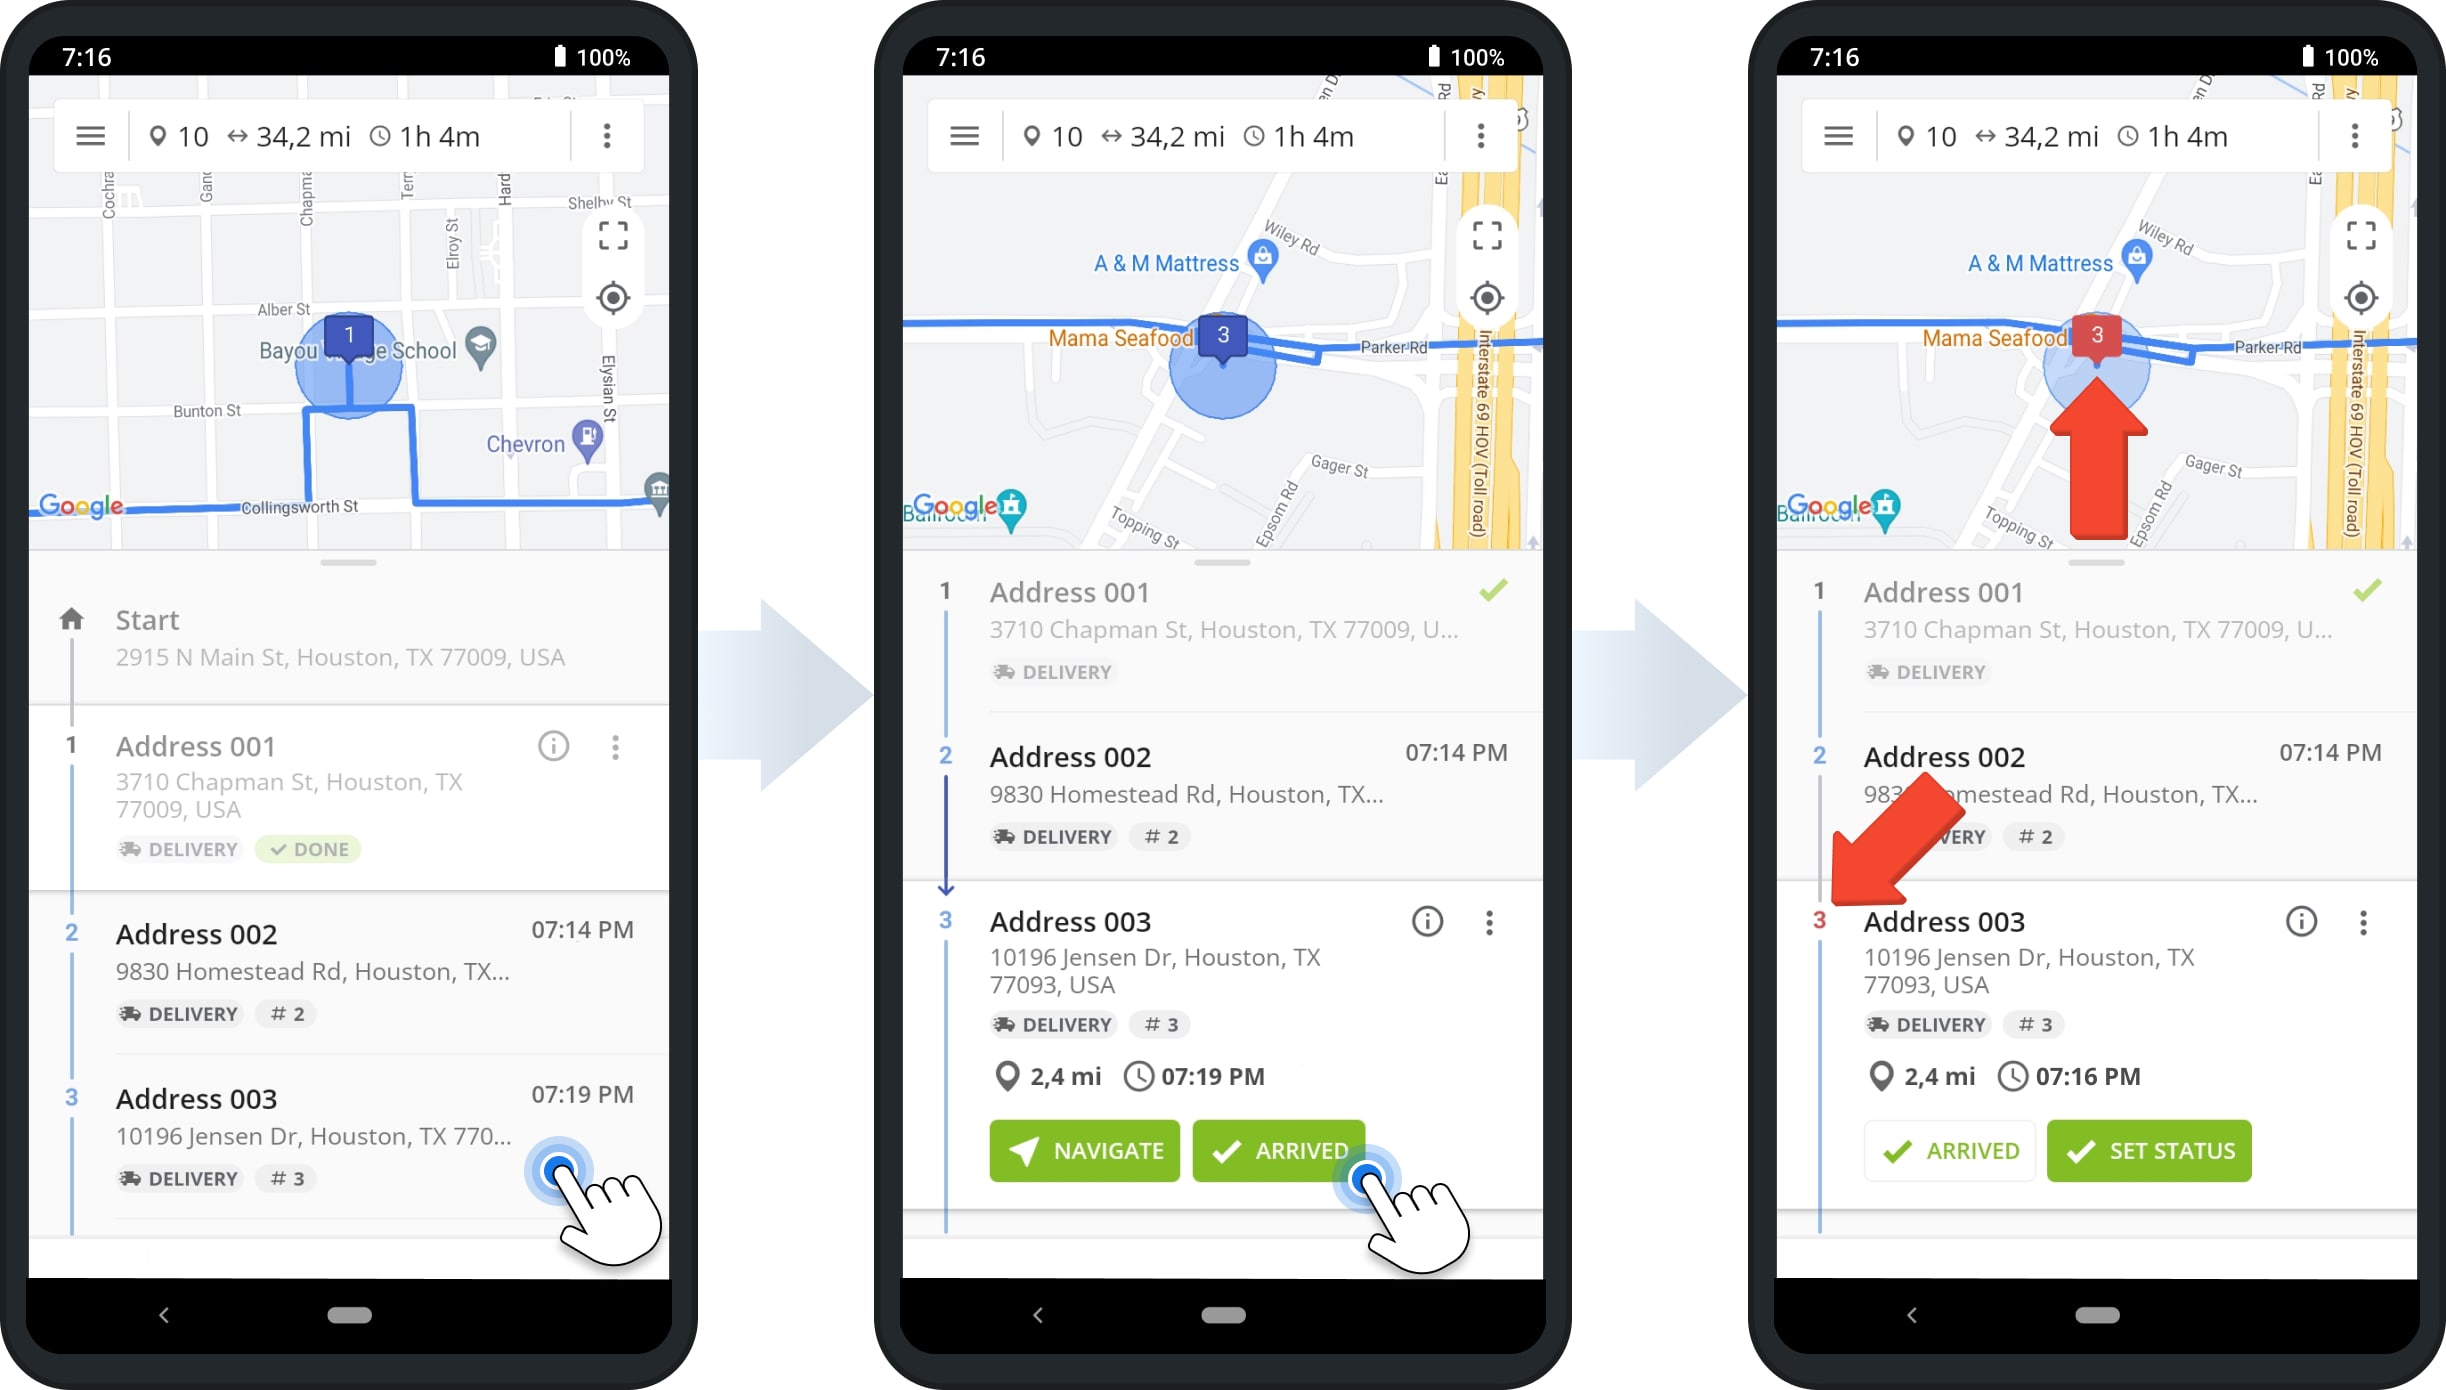 To visit a destination out of sequence, a driver selects and marks a destination as Arrived on the mobile app. Out of Sequence Destinations are also marked in red on the mobile app.